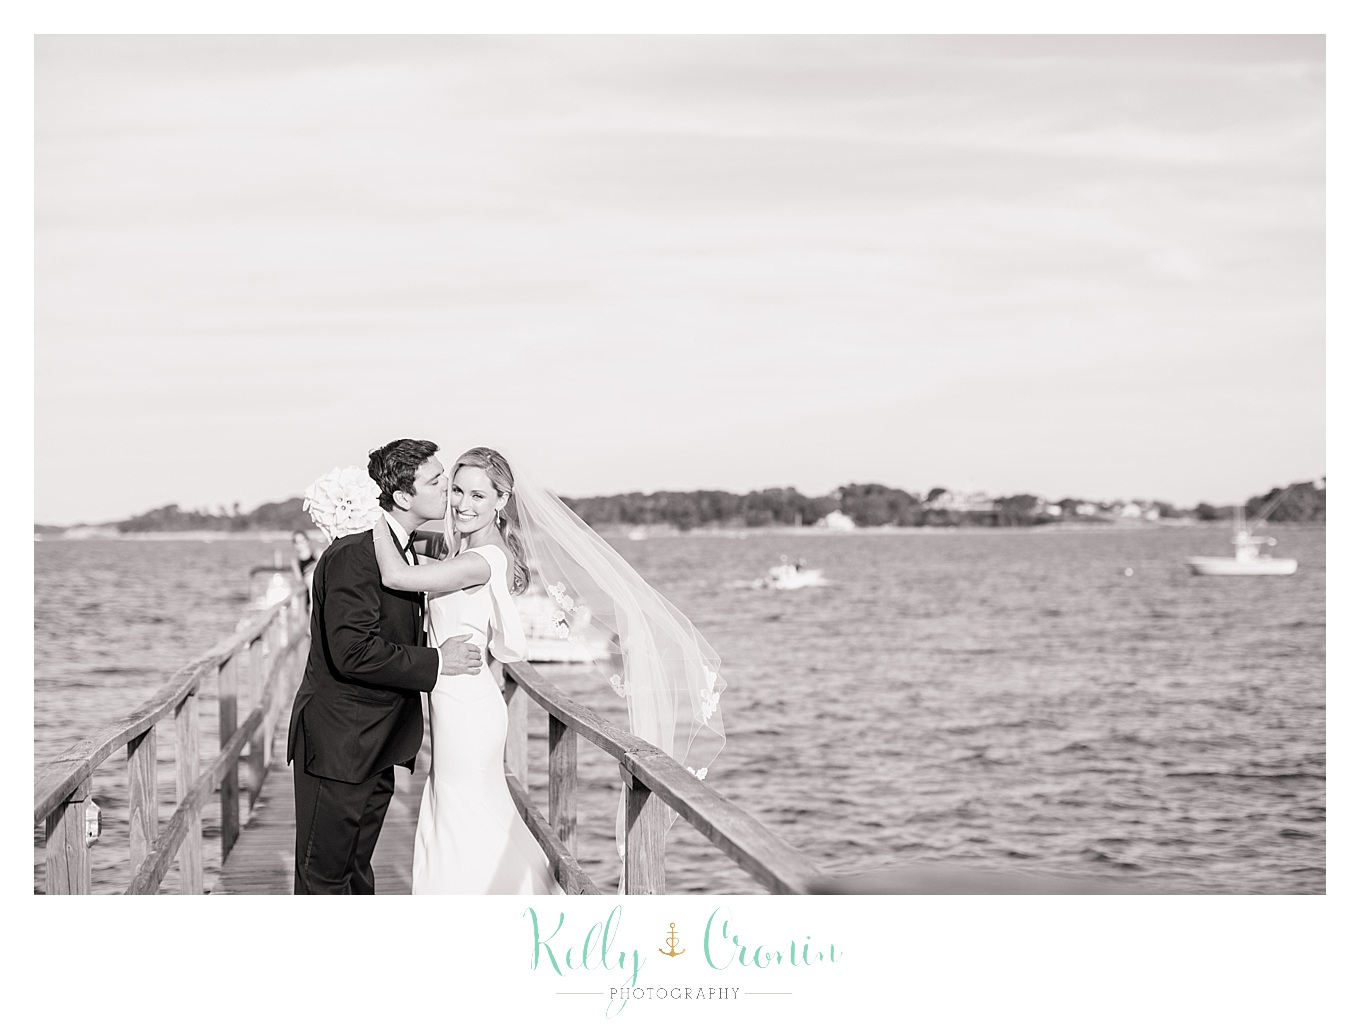 A man kisses his wife, creating Romance in Cape Cod. | Captured by Kelly Cronin Photography